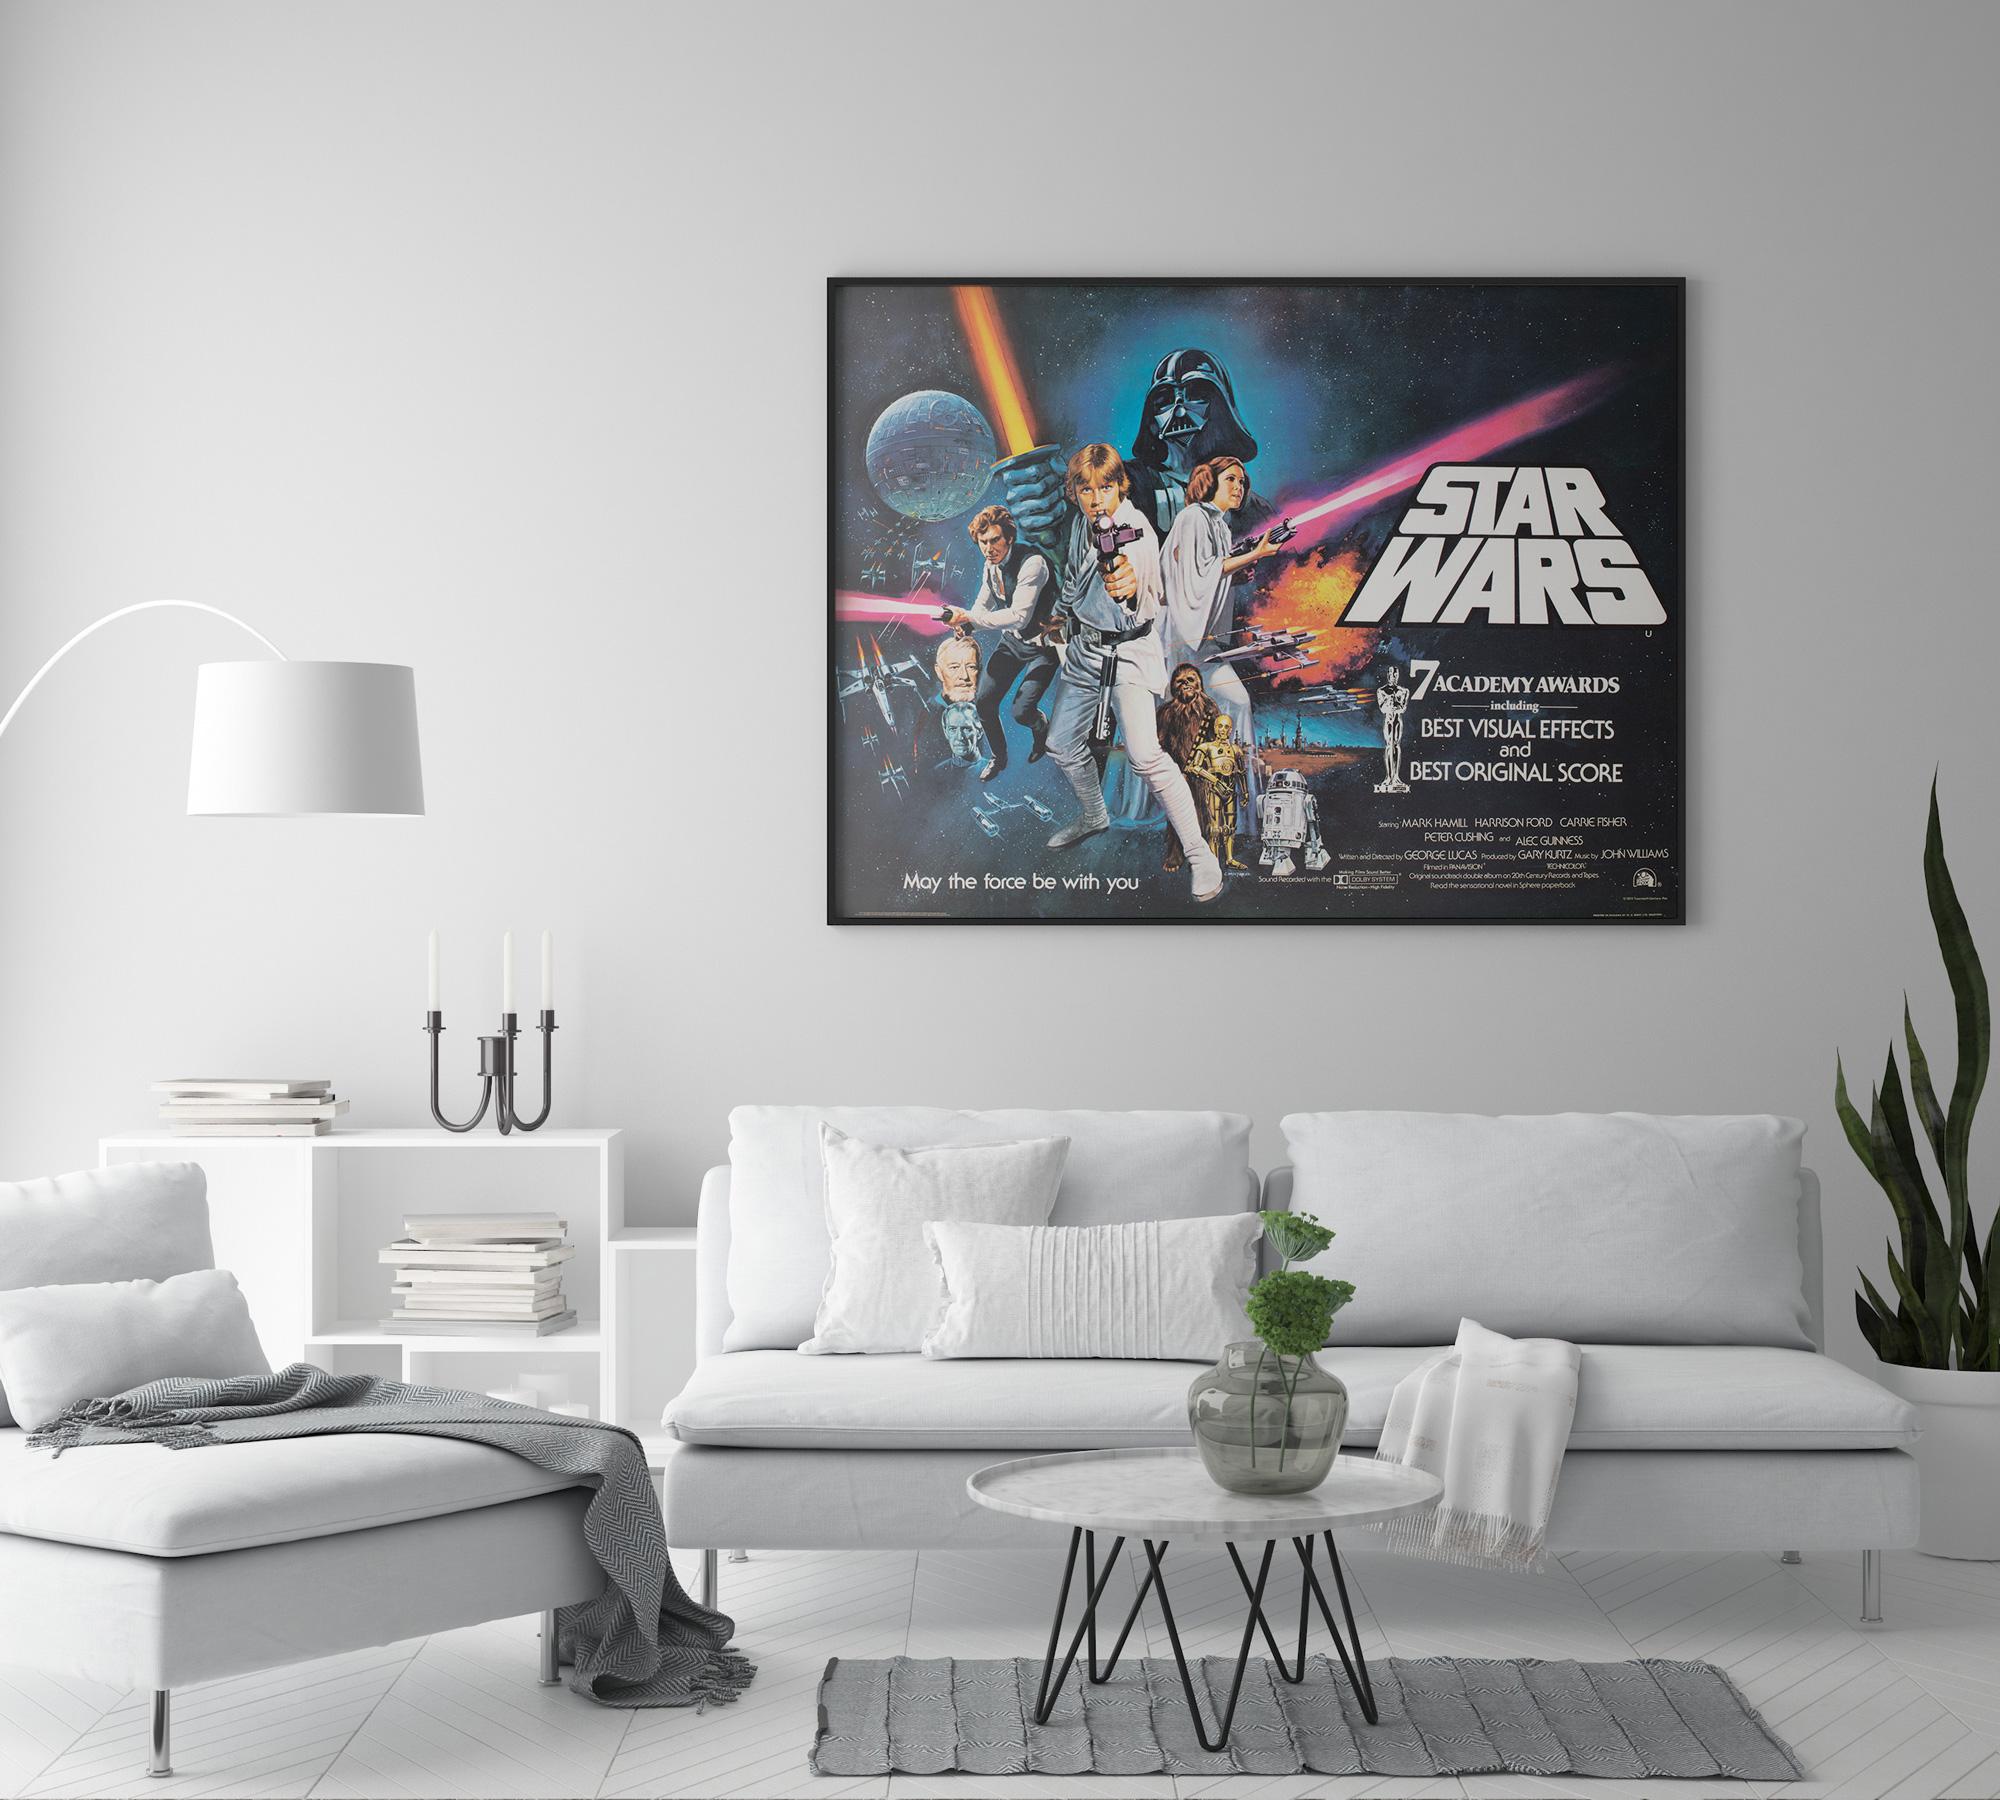 The fabulous Star Wars Style C Quad Oscars film poster with the iconic artwork by Tom Chantrell. Chantrell was tasked with enhancing the star appeal and the merchandising opportunities for Fox and George Lucas and he certainly delivered with this